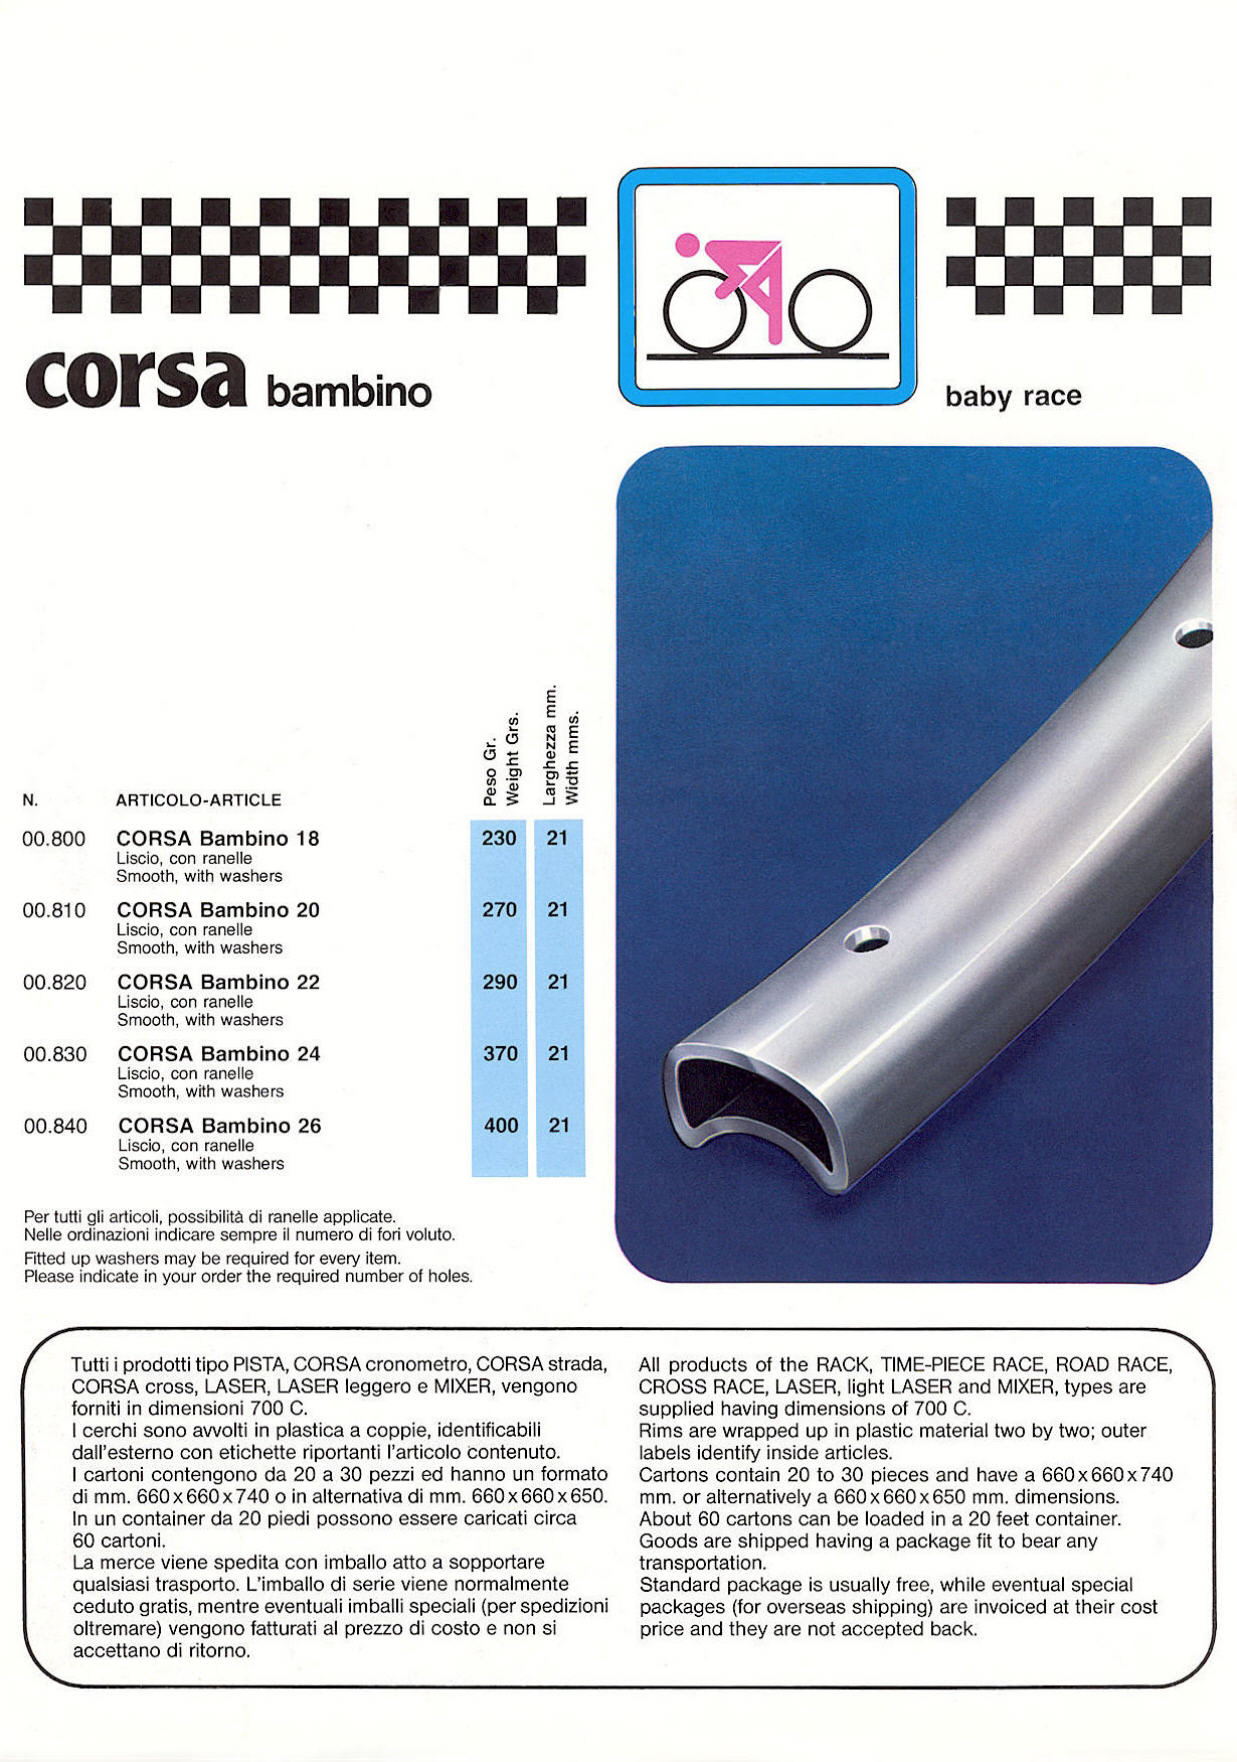 Nisi catalog (1985) - Page 010